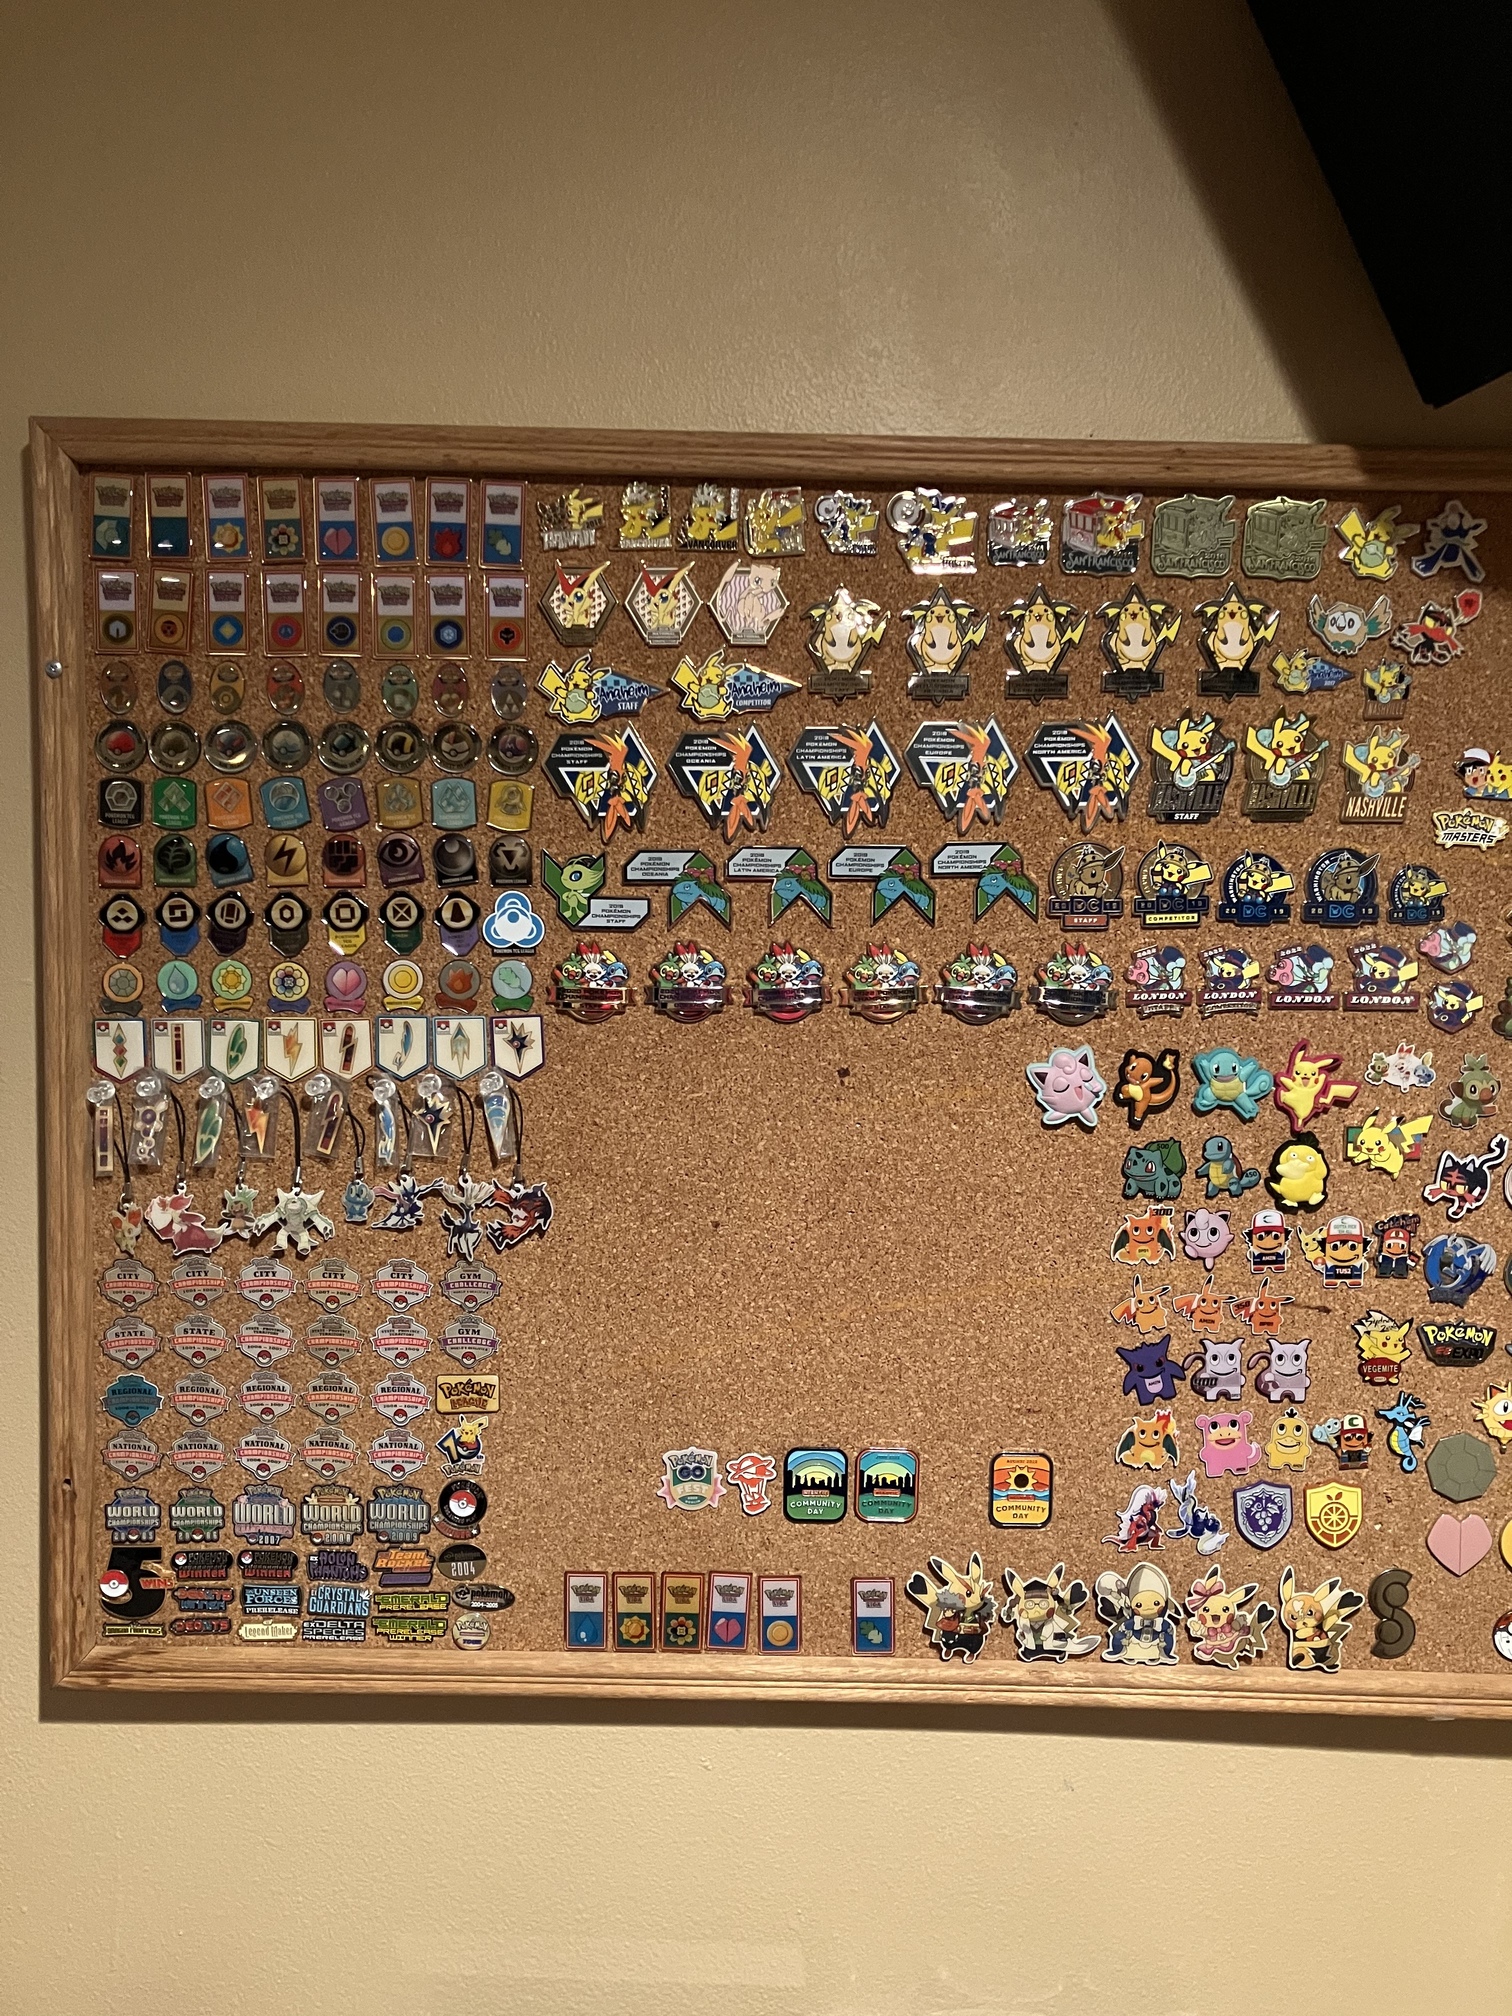 theFierceStorm's Officially Licensed Pokémon Pin Collection - Collecting -  Elite Fourum